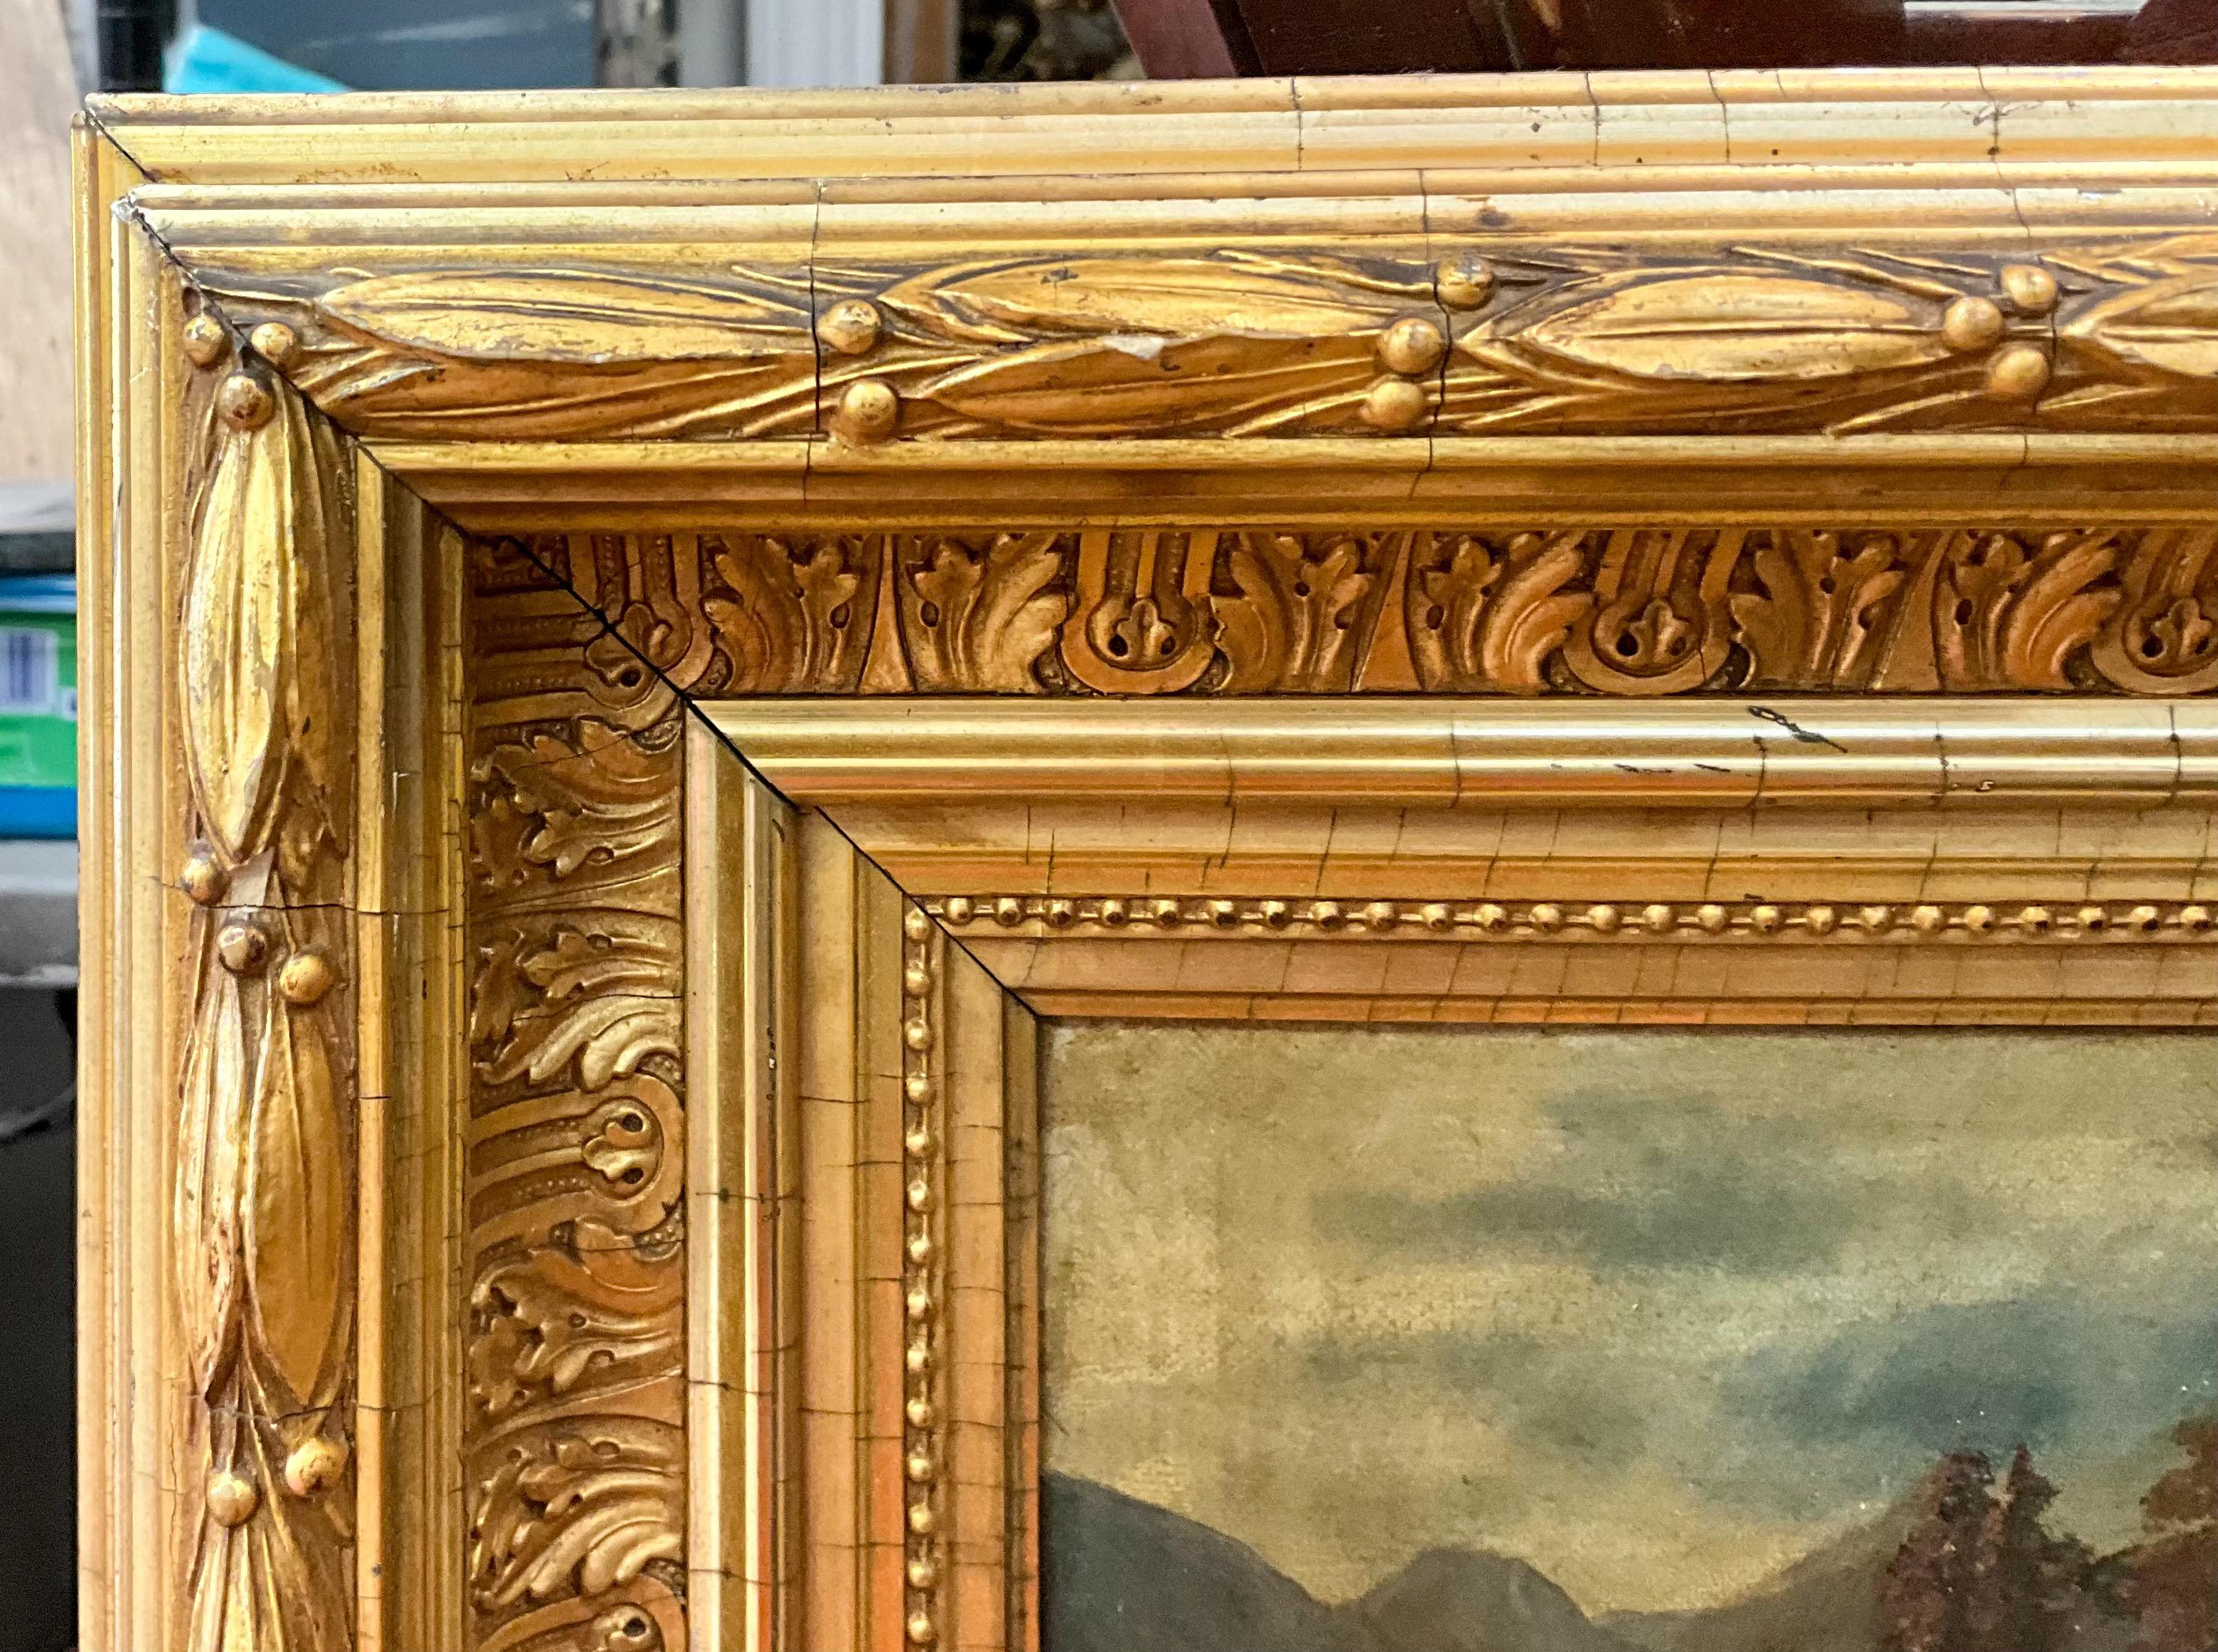 This is a late 19th century American oil on canvas depicting a scenic river scene with and old mill and pine trees. There is no visible signature. The water gilt frame is lovely with its carved acanthus and bellflowers. It has age appropriate wear. 